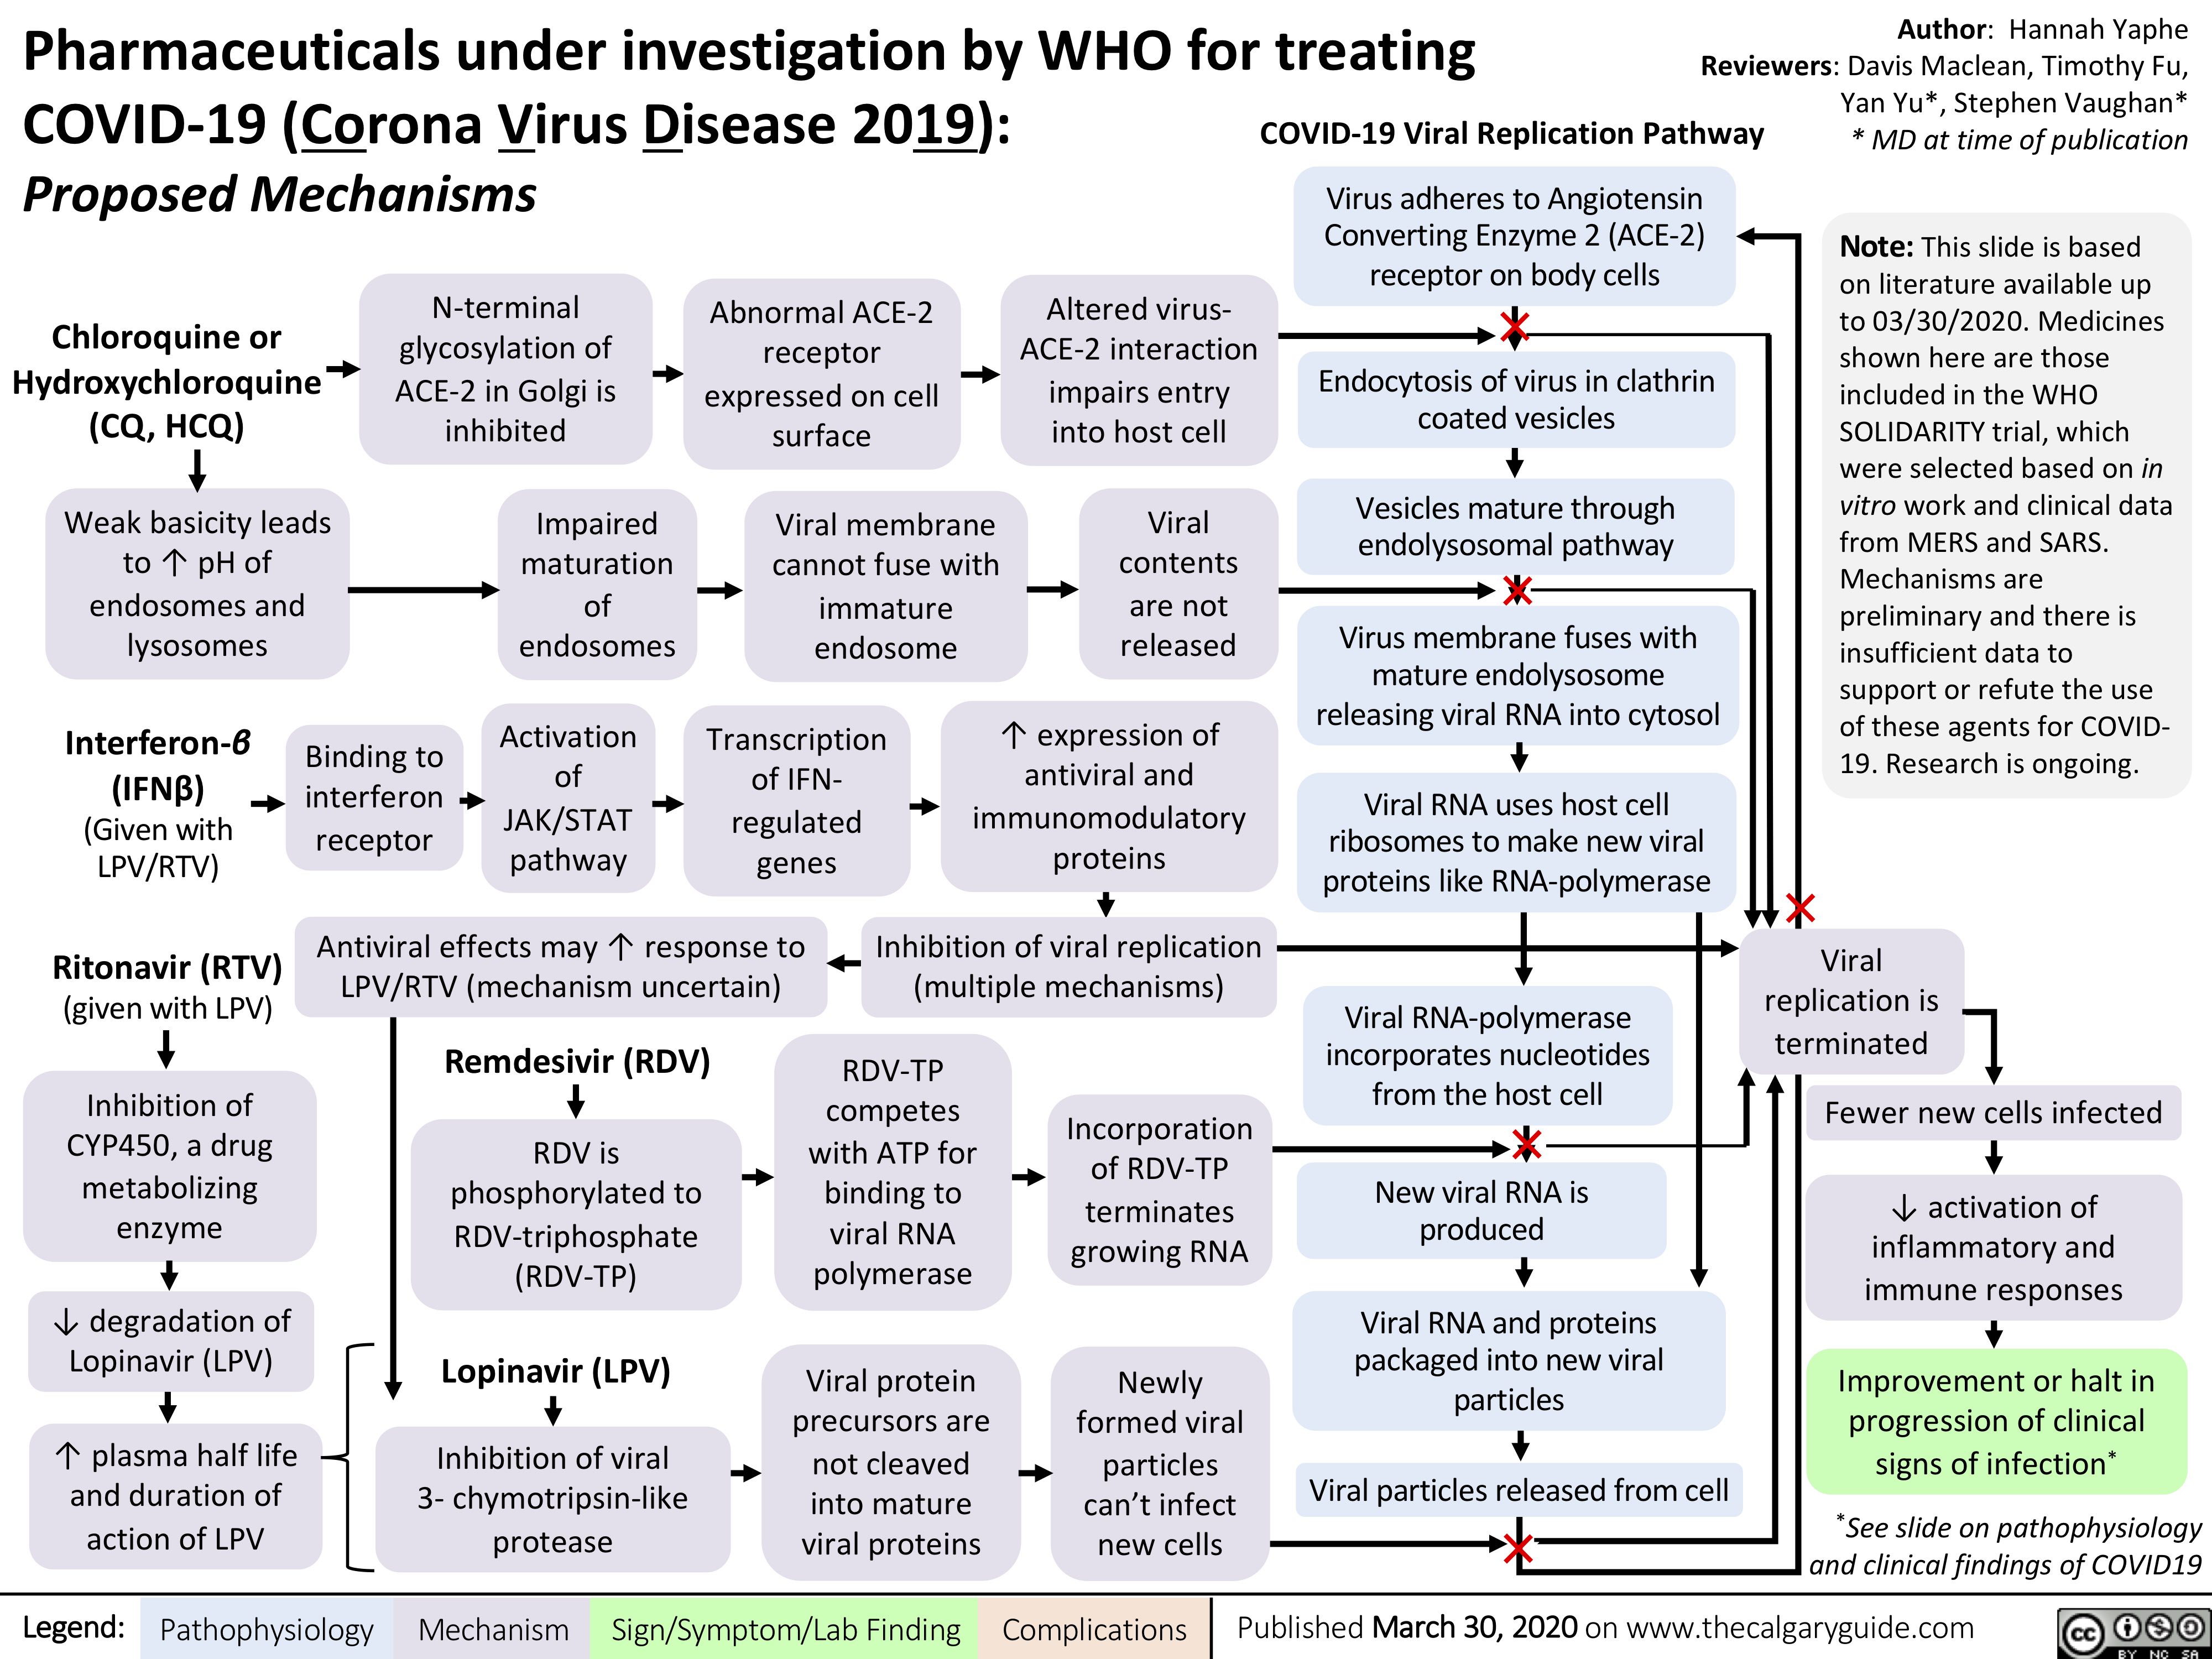 Pharmaceuticals under investigation by WHO for treating
Author: Hannah Yaphe Reviewers: Davis Maclean, Timothy Fu,
COVID-19 (Corona Virus Disease 2019):
Yan Yu*, Stephen Vaughan*
* MD at time of publication
Note: This slide is based on literature available up to 03/30/2020. Medicines shown here are those included in the WHO SOLIDARITY trial, which were selected based on in vitro work and clinical data from MERS and SARS. Mechanisms are preliminary and there is insufficient data to support or refute the use of these agents for COVID- 19. Research is ongoing.
Viral replication is terminated
Fewer new cells infected
↓ activation of inflammatory and immune responses
Improvement or halt in progression of clinical signs of infection*
*See slide on pathophysiology and clinical findings of COVID19
    Proposed Mechanisms
COVID-19 Viral Replication Pathway
Virus adheres to Angiotensin Converting Enzyme 2 (ACE-2) receptor on body cells
Endocytosis of virus in clathrin coated vesicles
Vesicles mature through endolysosomal pathway
Virus membrane fuses with mature endolysosome releasing viral RNA into cytosol
Viral RNA uses host cell ribosomes to make new viral proteins like RNA-polymerase
Viral RNA-polymerase incorporates nucleotides from the host cell
New viral RNA is produced
Viral RNA and proteins packaged into new viral particles
Viral particles released from cell
        Chloroquine or Hydroxychloroquine (CQ, HCQ)
Weak basicity leads to ↑ pH of endosomes and lysosomes
N-terminal glycosylation of ACE-2 in Golgi is inhibited
Abnormal ACE-2 receptor expressed on cell surface
Viral membrane cannot fuse with immature endosome
Altered virus- ACE-2 interaction impairs entry into host cell
Viral contents are not released
                       Interferon-β (IFNβ) (Given with LPV/RTV)
Ritonavir (RTV)
(given with LPV)
Inhibition of CYP450, a drug metabolizing enzyme
↓ degradation of Lopinavir (LPV)
↑ plasma half life and duration of action of LPV
Binding to interferon receptor
Impaired maturation of endosomes
Activation of JAK/STAT pathway
Transcription of IFN- regulated genes
↑ expression of antiviral and immunomodulatory proteins
             Antiviral effects may ↑ response to LPV/RTV (mechanism uncertain)
Remdesivir (RDV)
RDV is phosphorylated to RDV-triphosphate (RDV-TP)
Lopinavir (LPV)
Inhibition of viral 3- chymotripsin-like protease
Inhibition of viral replication (multiple mechanisms)
       RDV-TP competes with ATP for binding to viral RNA polymerase
Viral protein precursors are not cleaved into mature viral proteins
Incorporation of RDV-TP terminates growing RNA
Newly formed viral particles can’t infect new cells
                                  Legend:
 Pathophysiology
 Mechanism
Sign/Symptom/Lab Finding
  Complications
Published March 30, 2020 on www.thecalgaryguide.com
   